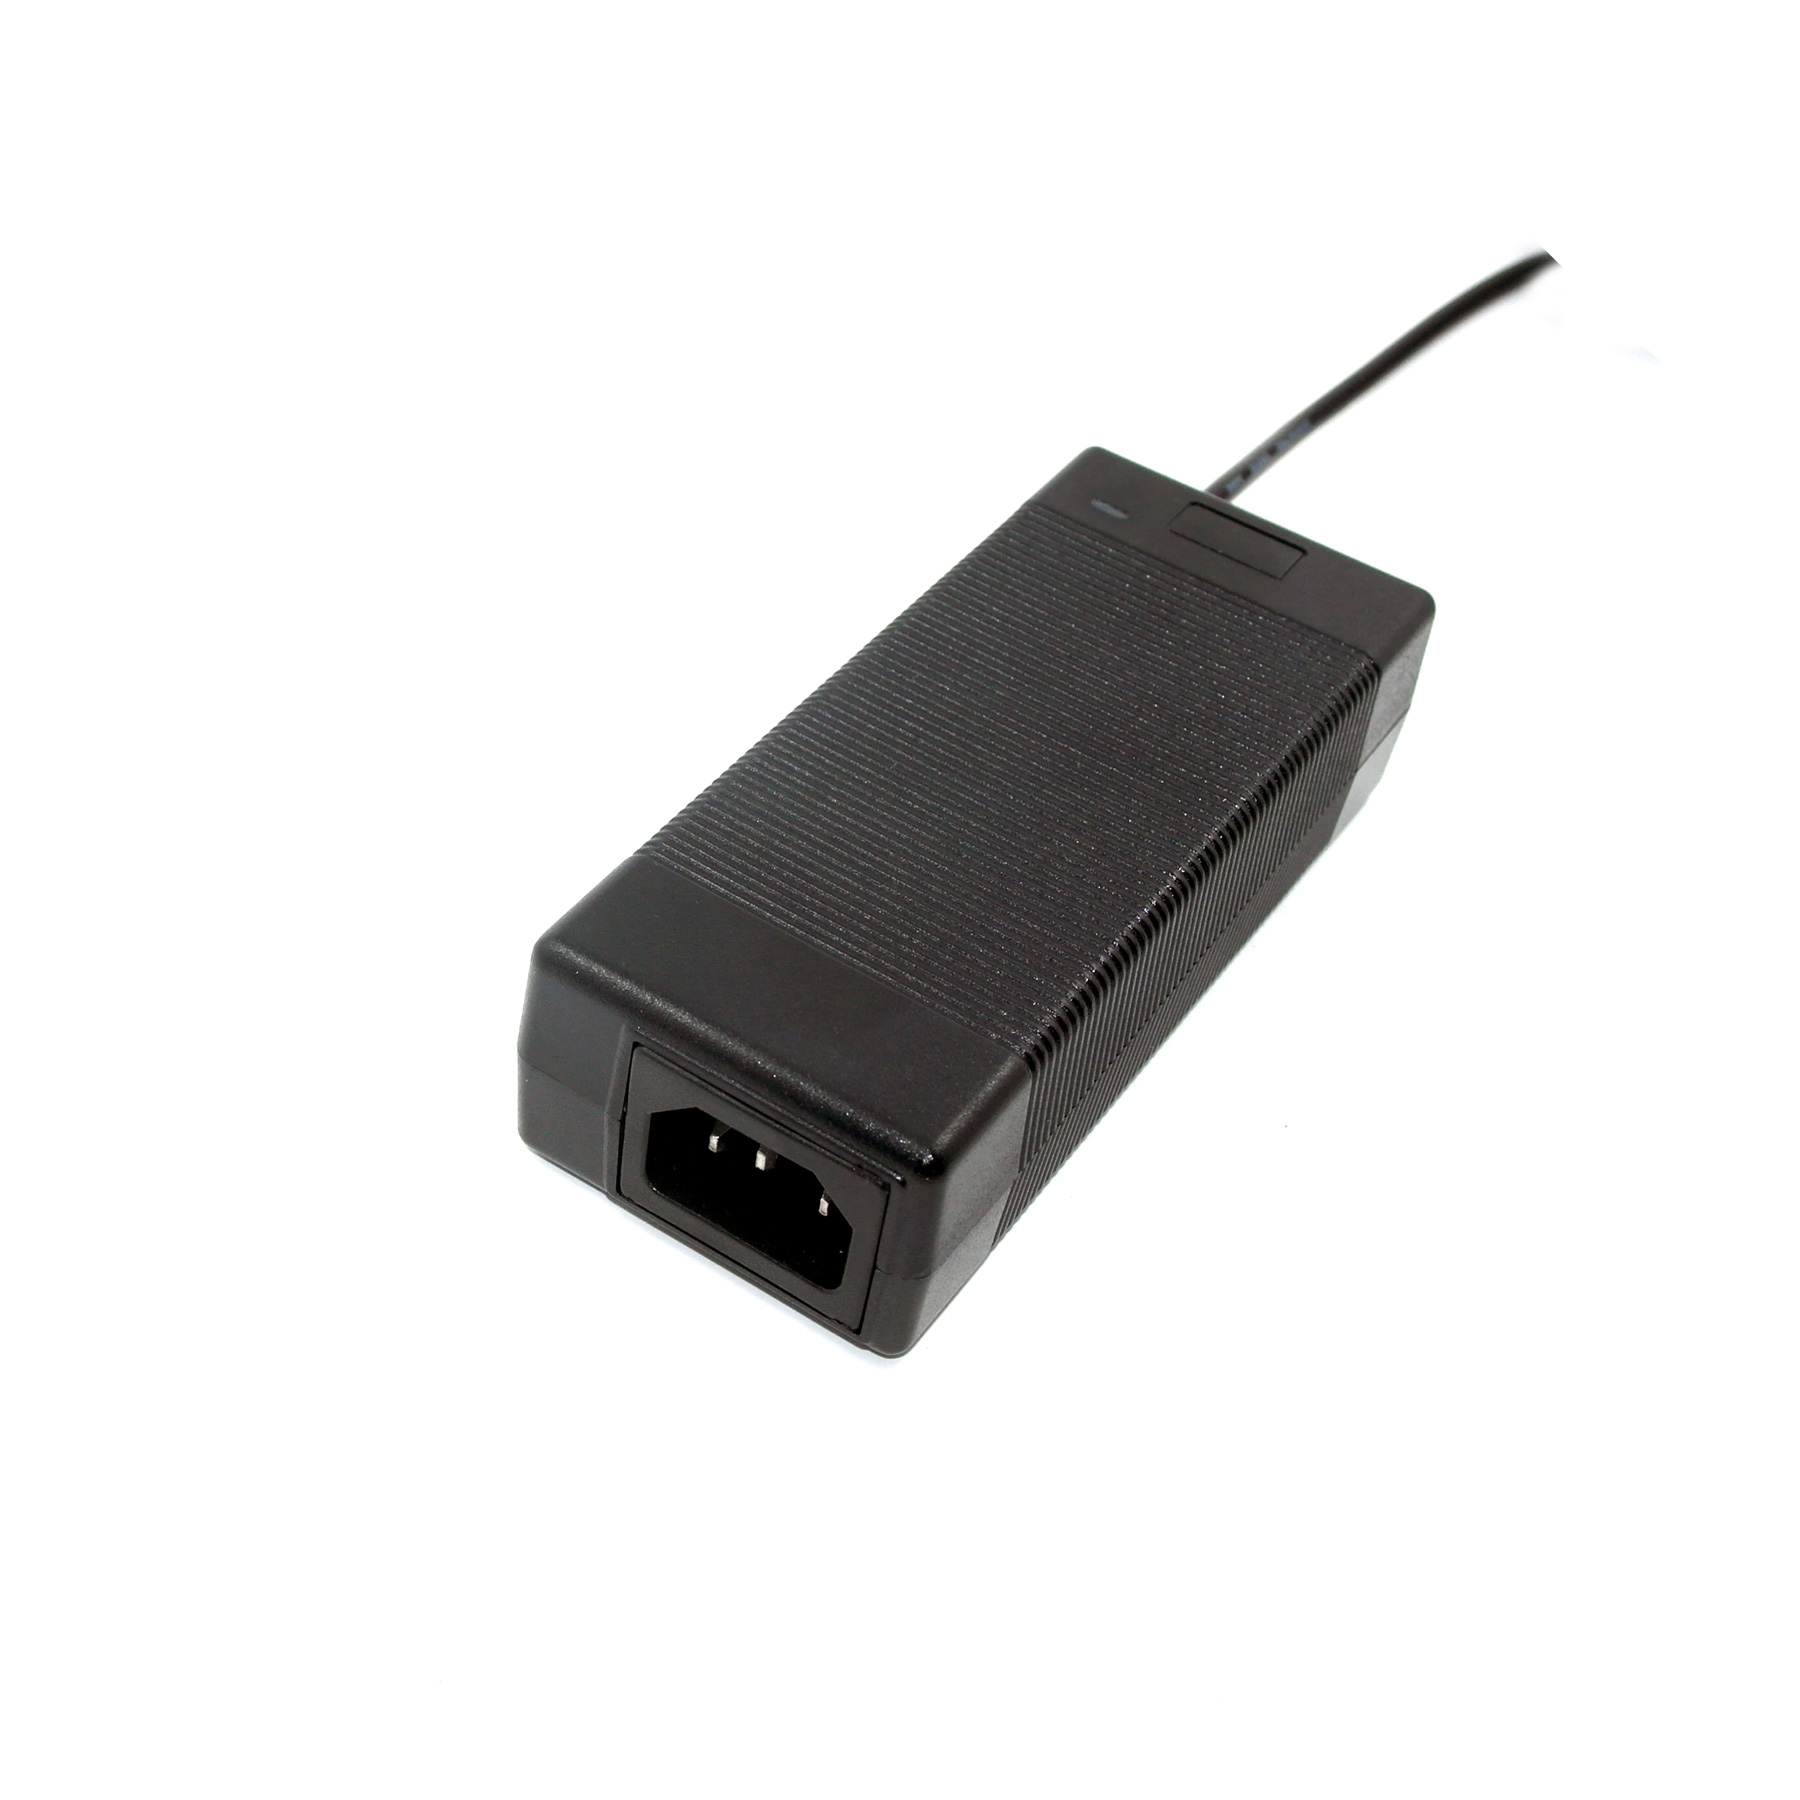 KRE-2400300D,24V 3A 72W switching power supply, desktop type switching power adapter